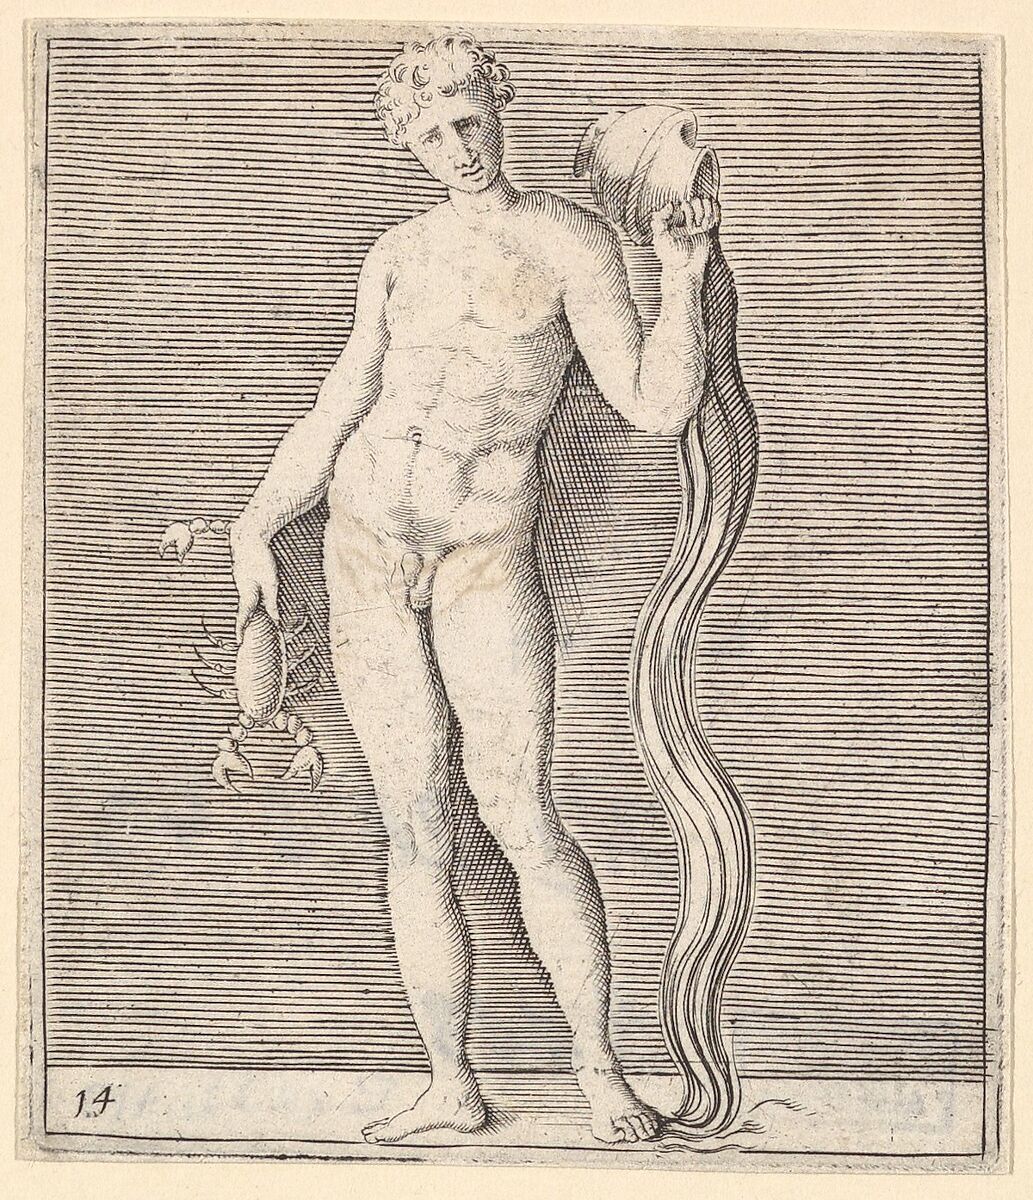 Man with Crayfish and Urn of Water, from "Ex Antiquis Cameorum et Gemmae Delineata/ Liber Secundus/et ab Enea Vico Parmen Incis", Engraved by Anonymous, Italian, 16th century, Engraving; third state 